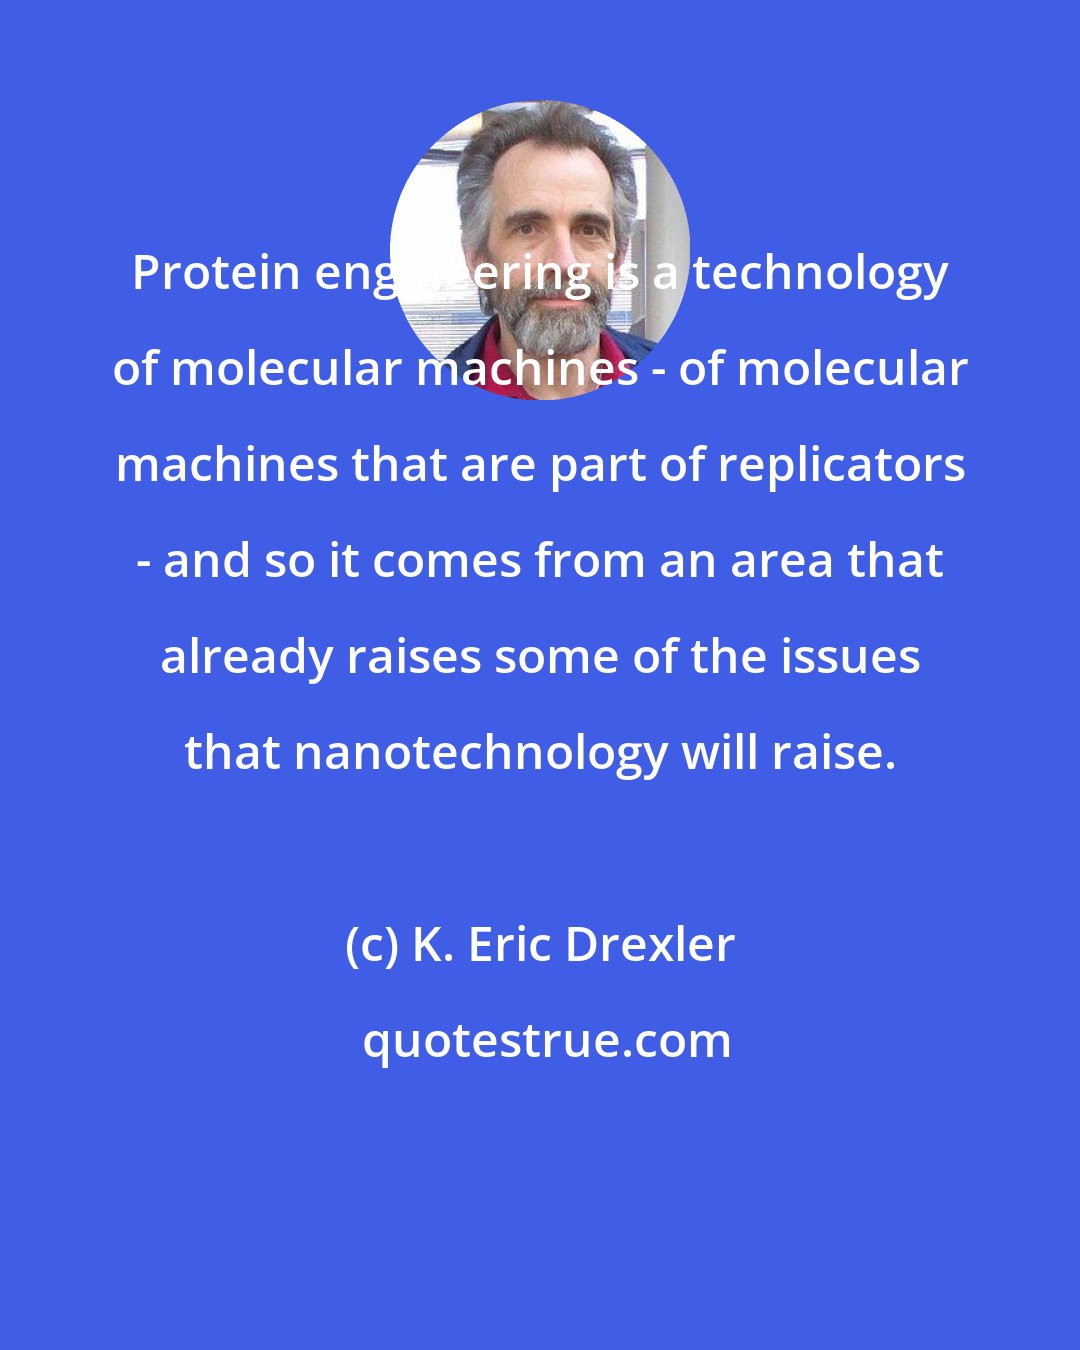 K. Eric Drexler: Protein engineering is a technology of molecular machines - of molecular machines that are part of replicators - and so it comes from an area that already raises some of the issues that nanotechnology will raise.